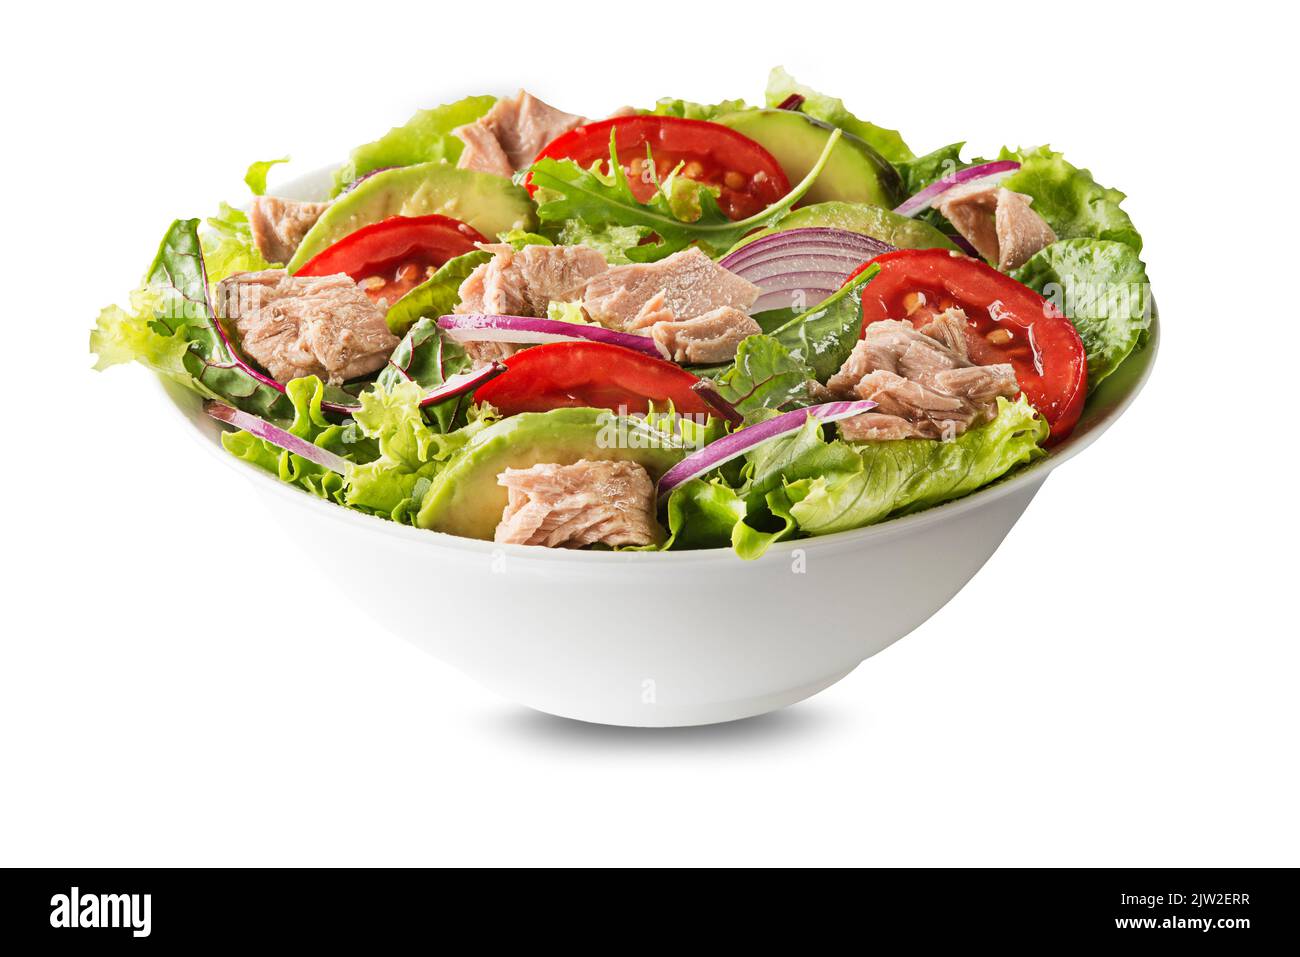 Fresh green leafy salad with tuna avocado and tomato isolated on white background. Concept for a tasty and healthy meal Stock Photo